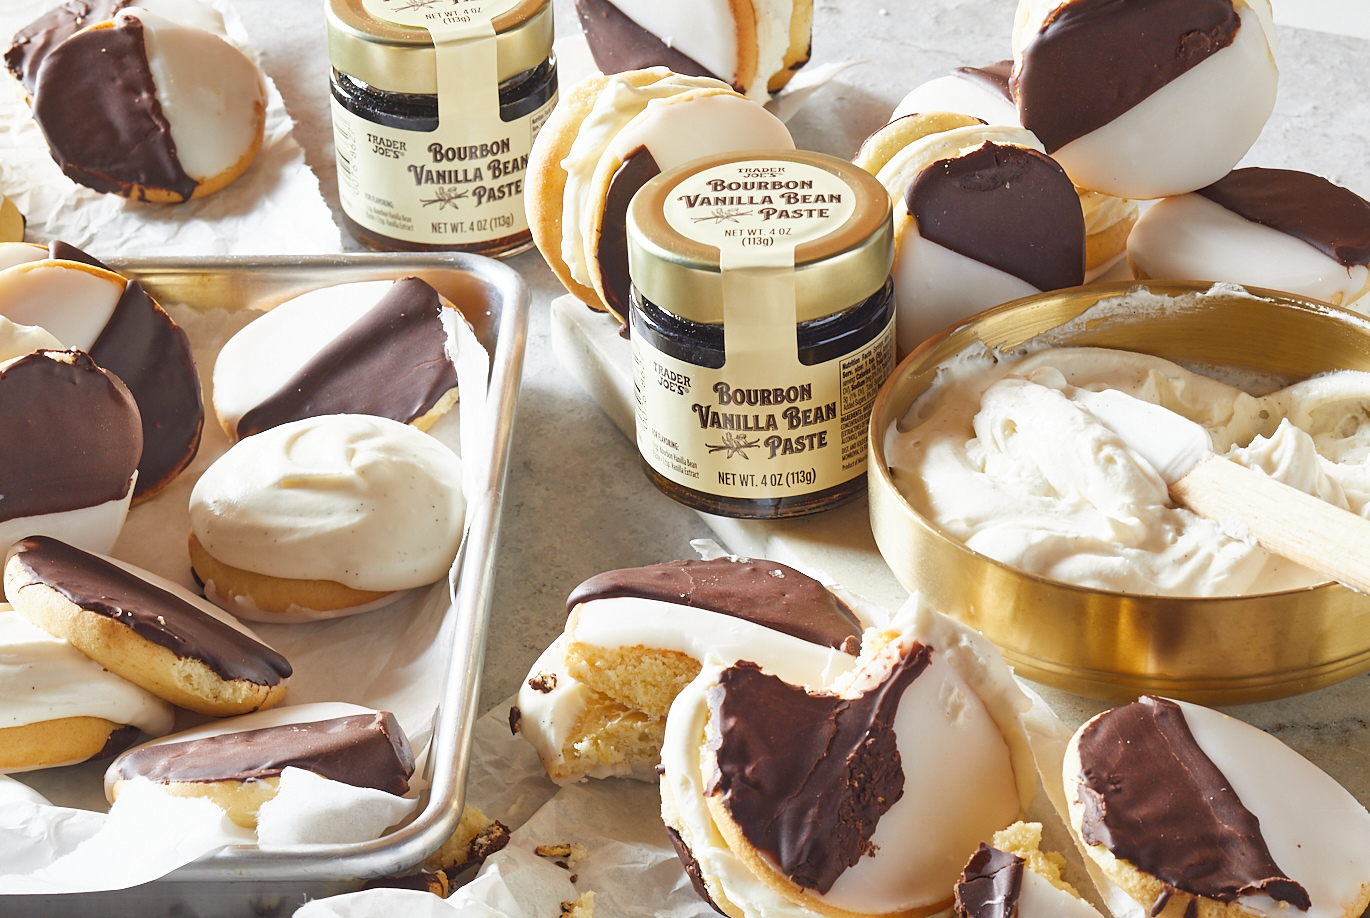 Trader Joe's Bourbon Vanilla Bean Paste; used in recipe for Vanilla Bean Cream frosting; in a gold bowl and between Half Moon cookie sandwiches in baking tray and on parchment